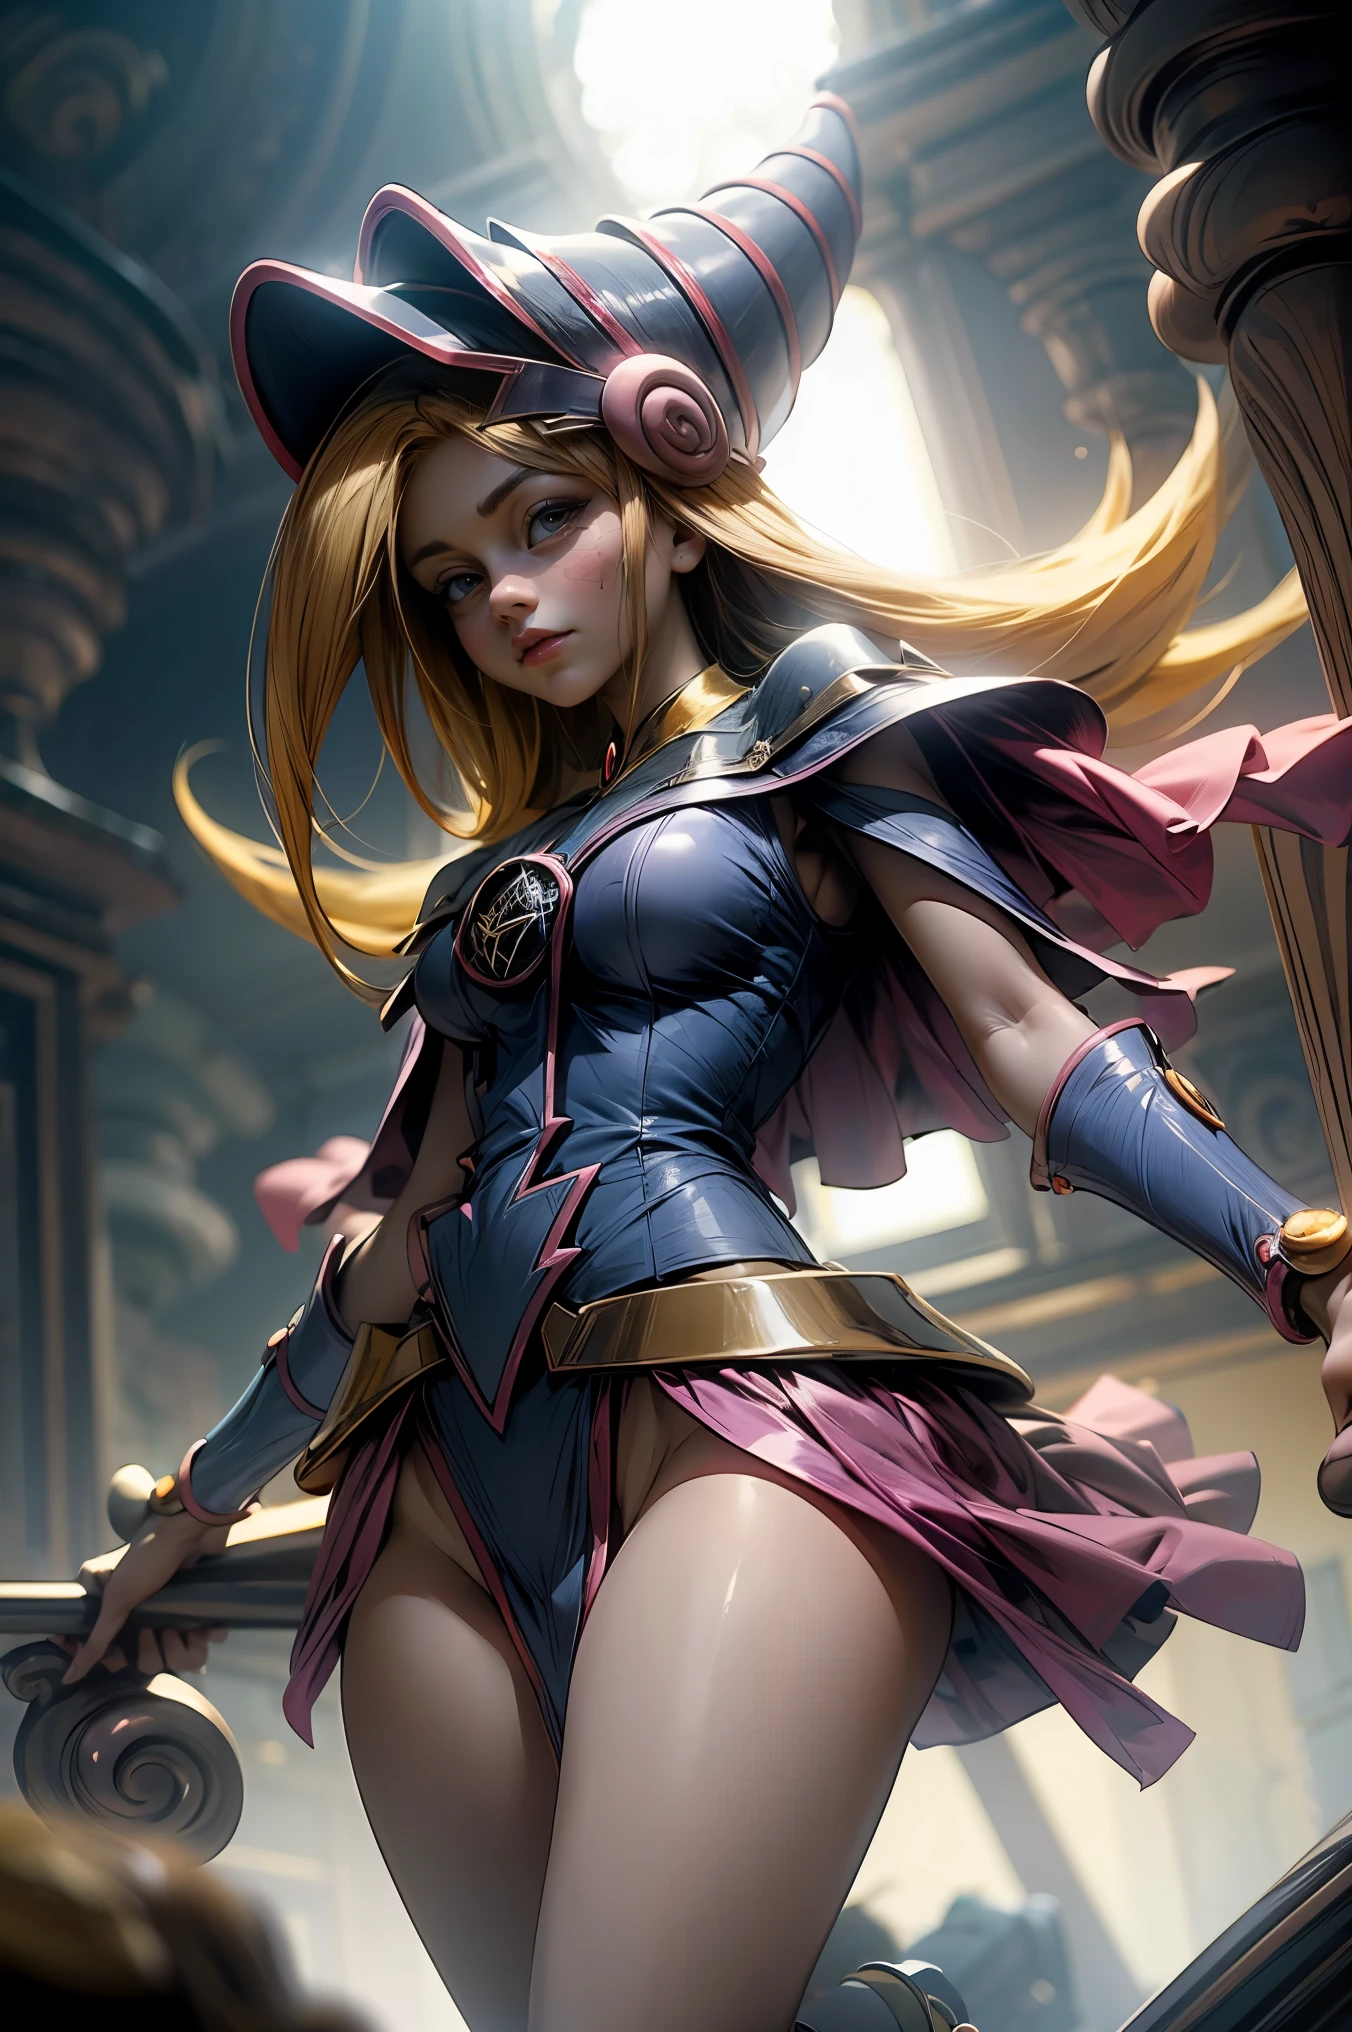 (Masterpiece:1.2), (The best quality:1.2), Perfect lighting, Dark Magician Girl casting a spell, floating in the air, big tits, neckline, magic background. Transparent hearts in the air, blue robe, big hat, From above, sparkles, Yugioh Card in the background